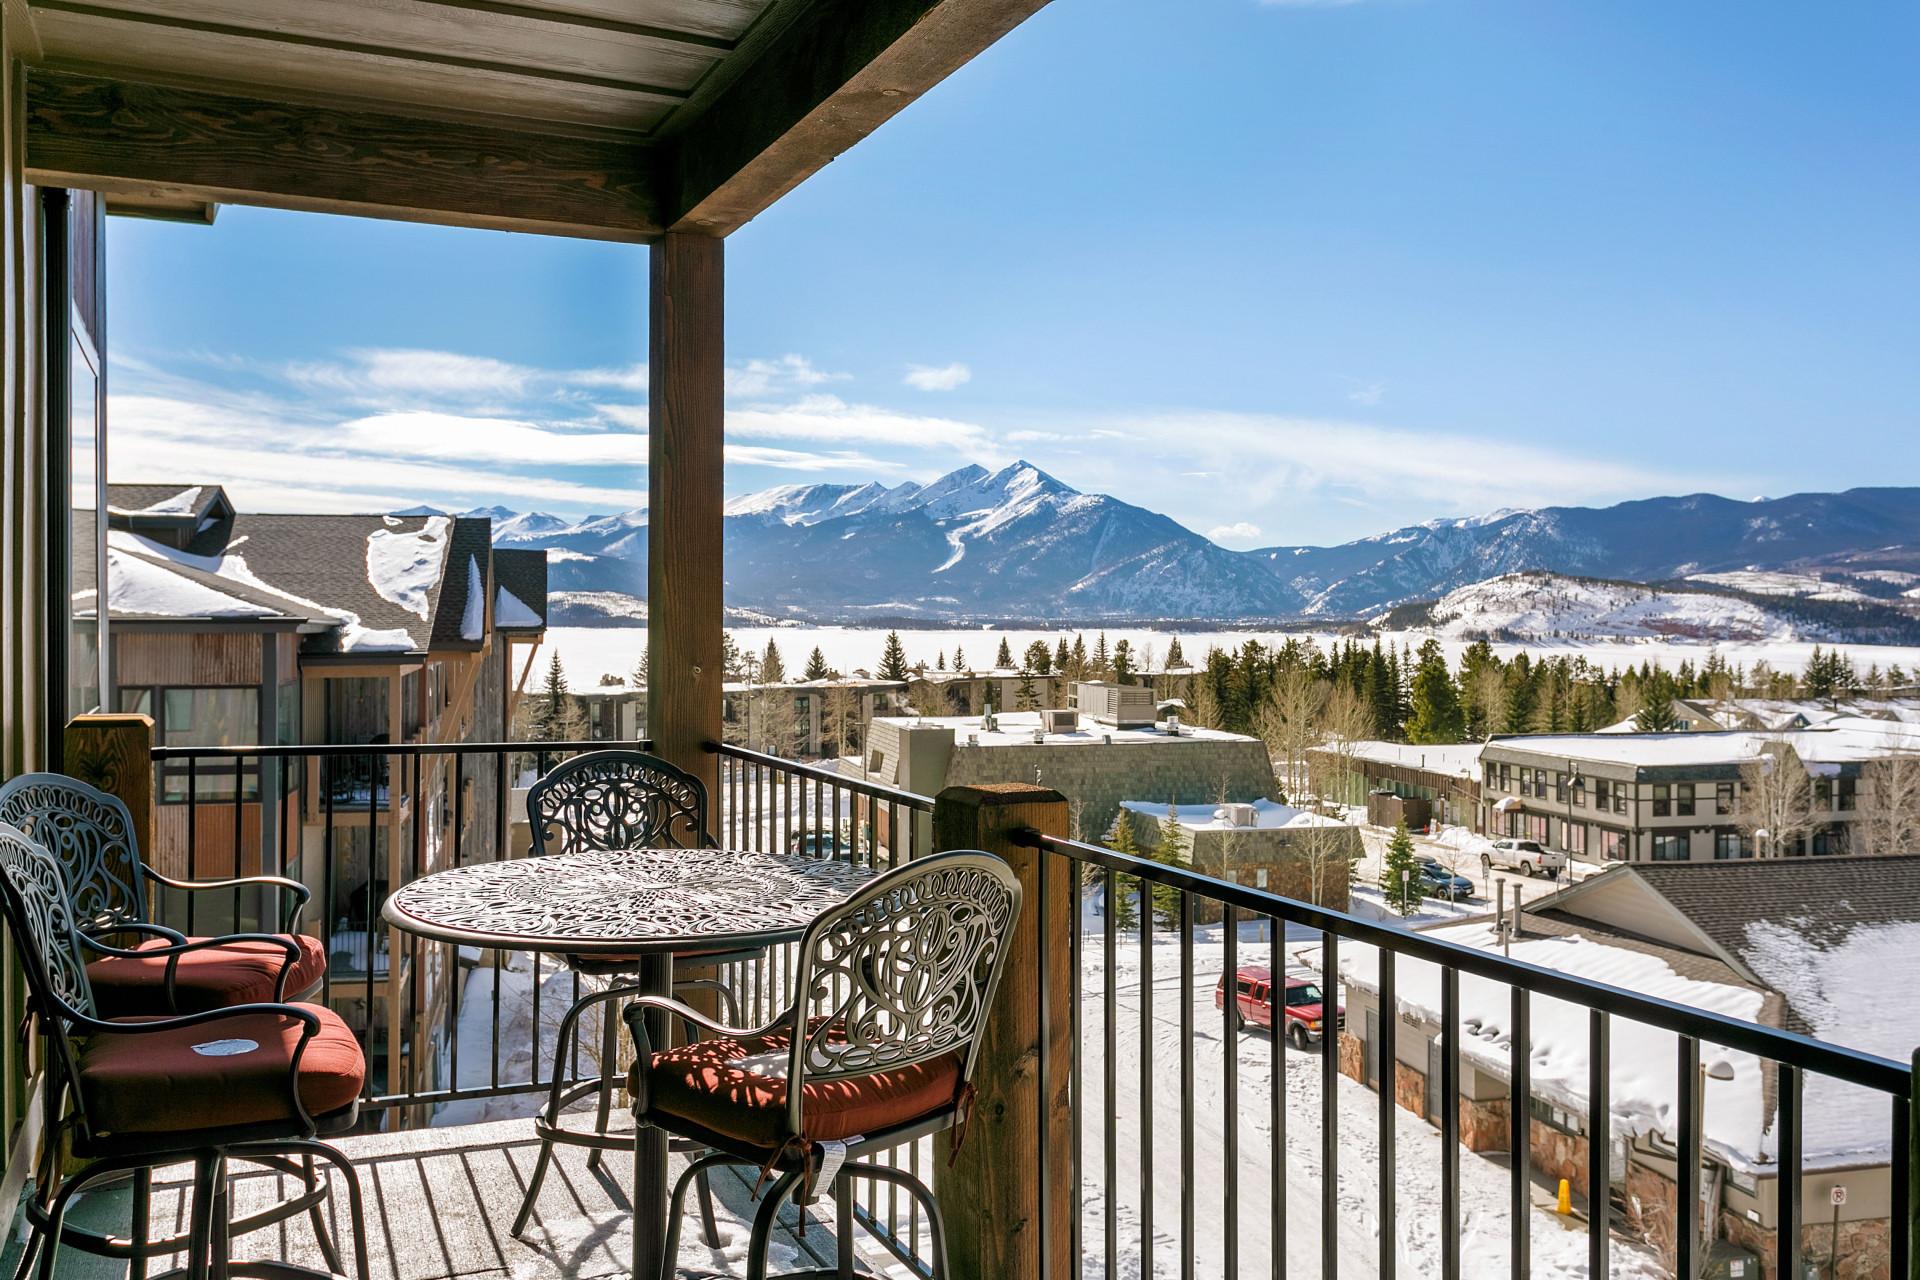 Property Image 2 - Take in Breathtaking Lake, Mountain Views from this Penthouse Condo While Staying Central to Skiing!